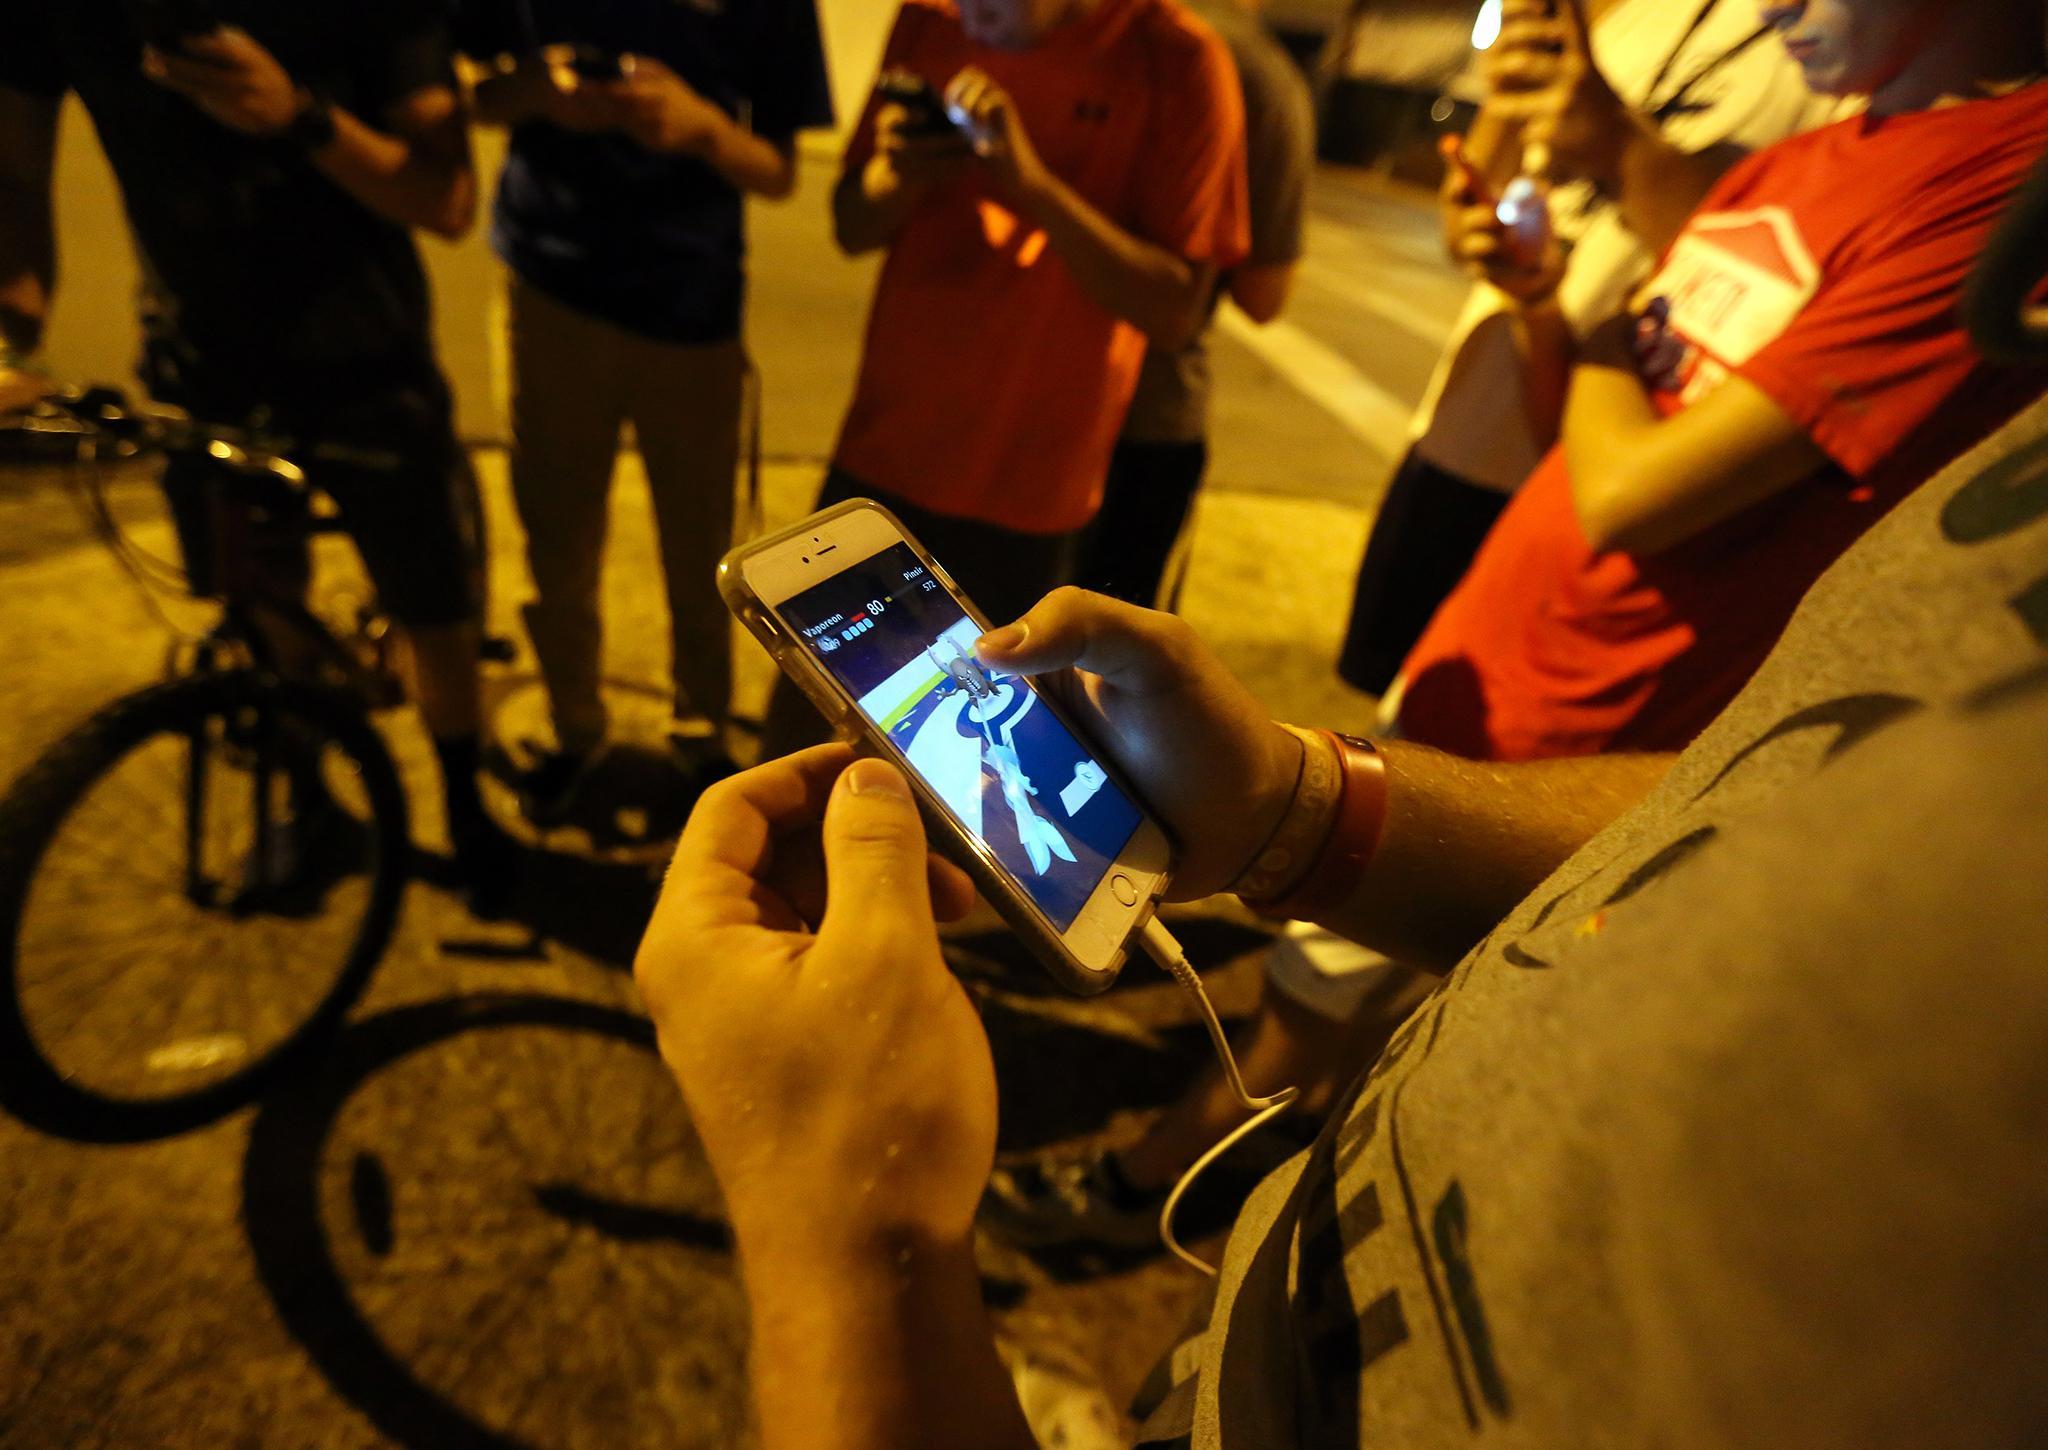 Police have warned that Pokemon Go can put people in danger, because it encourages people to head to usually off-limits areas